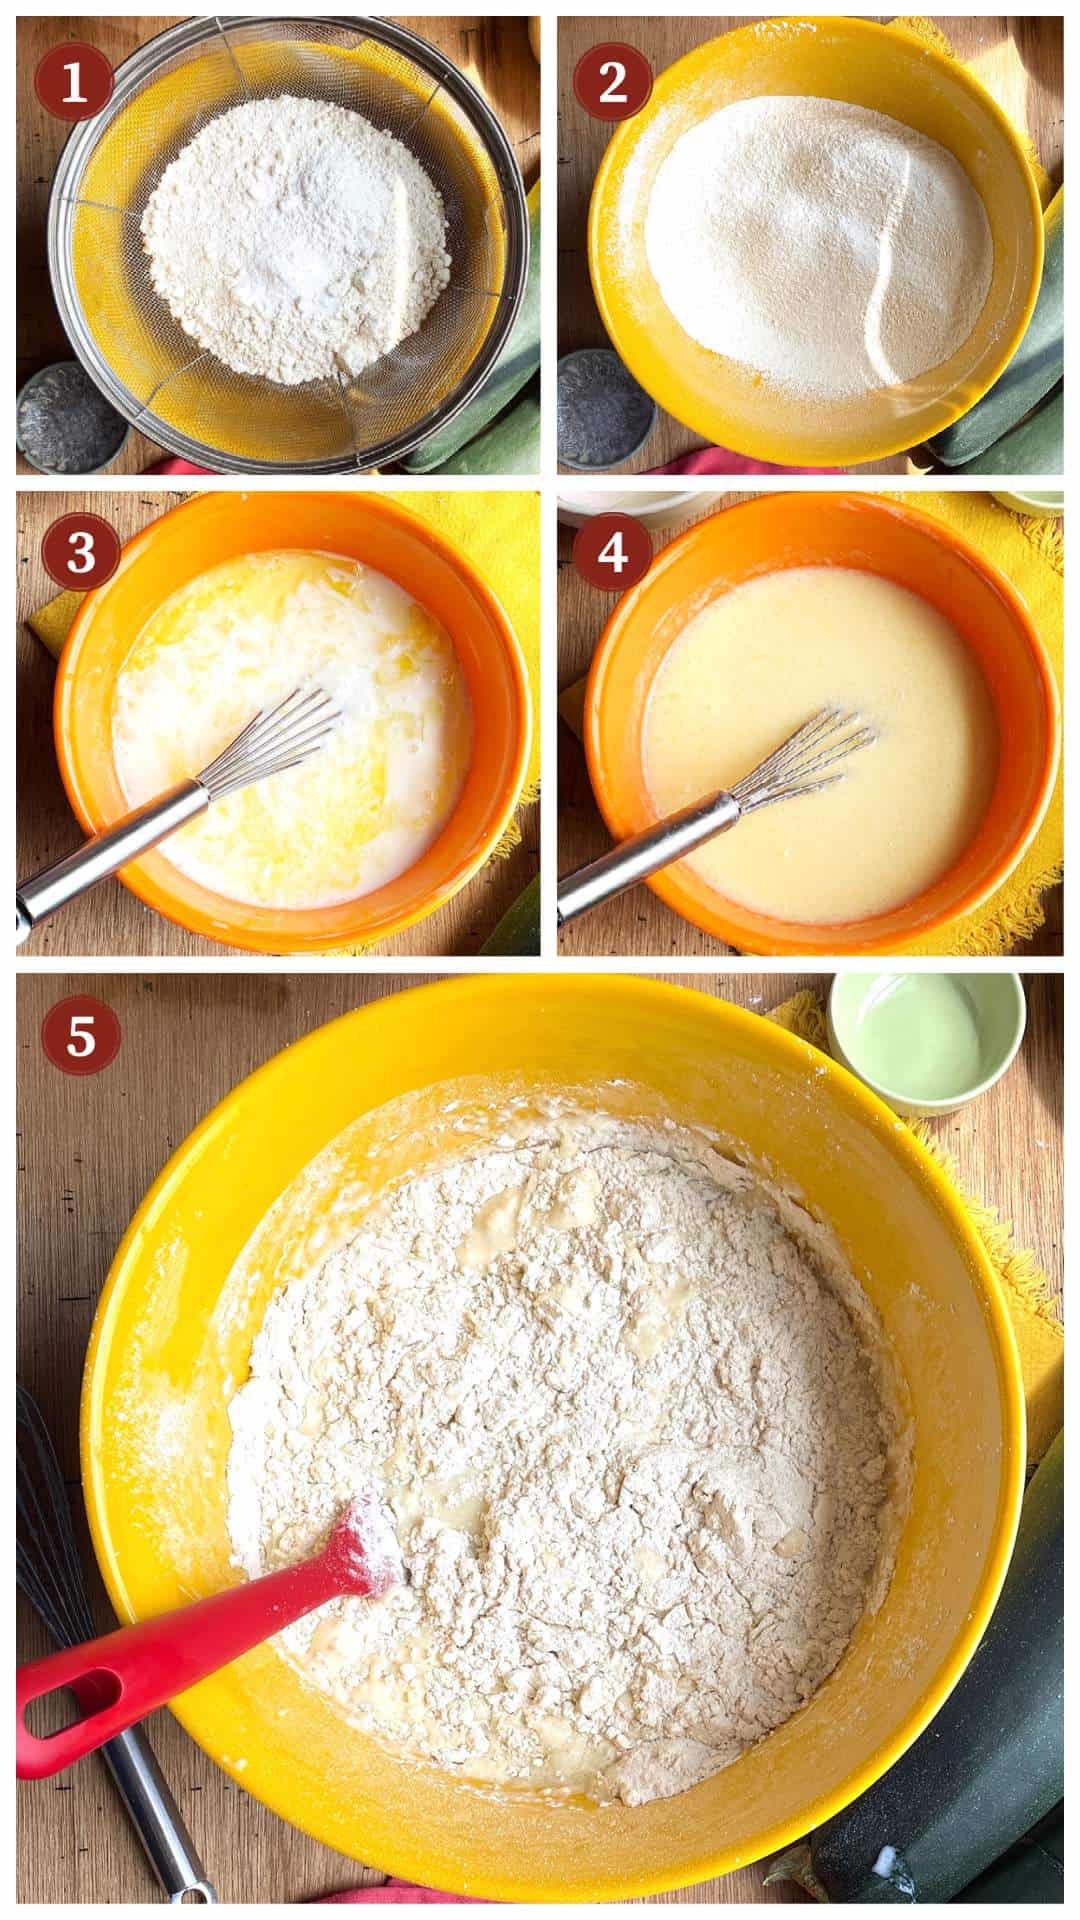 A collage of images showing how to make savory zucchini muffins and bread, steps 1 - 5.